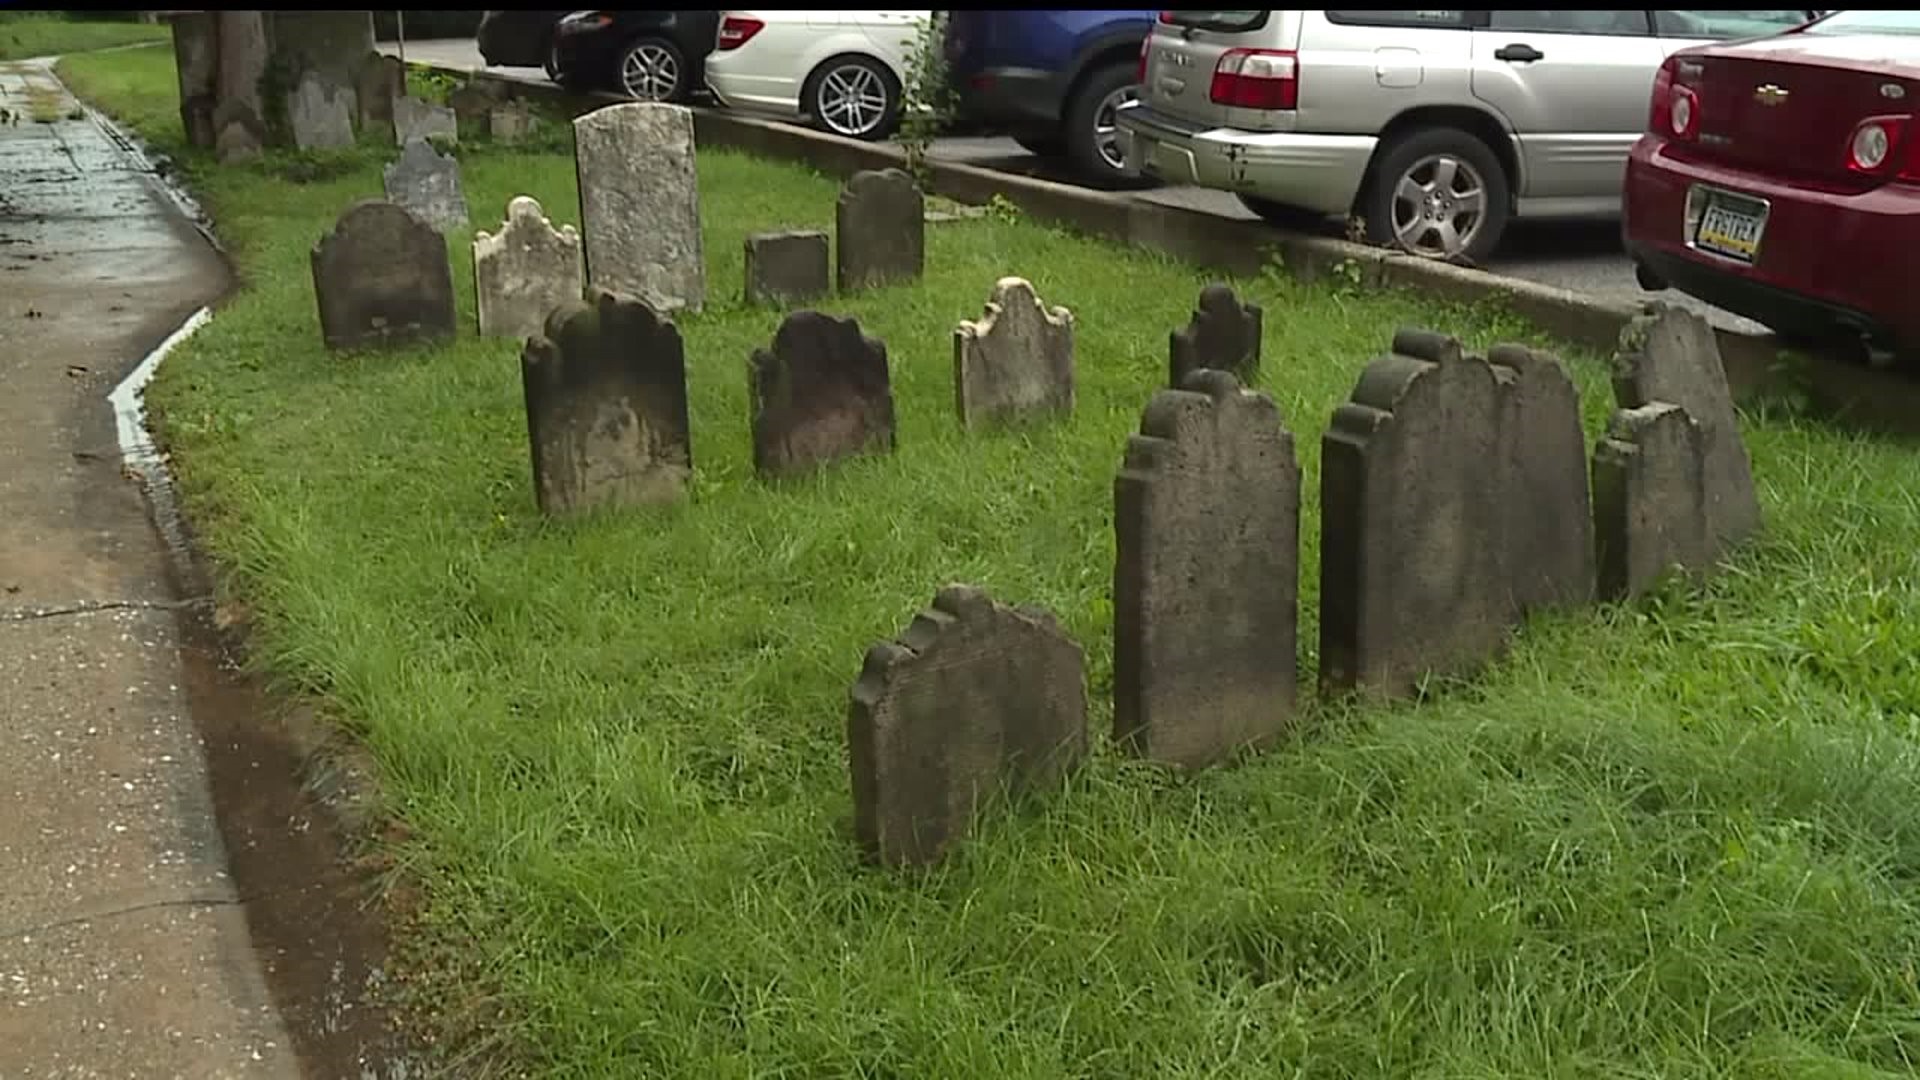 Plans to relocate abandoned York cemetery begins with search for descendants